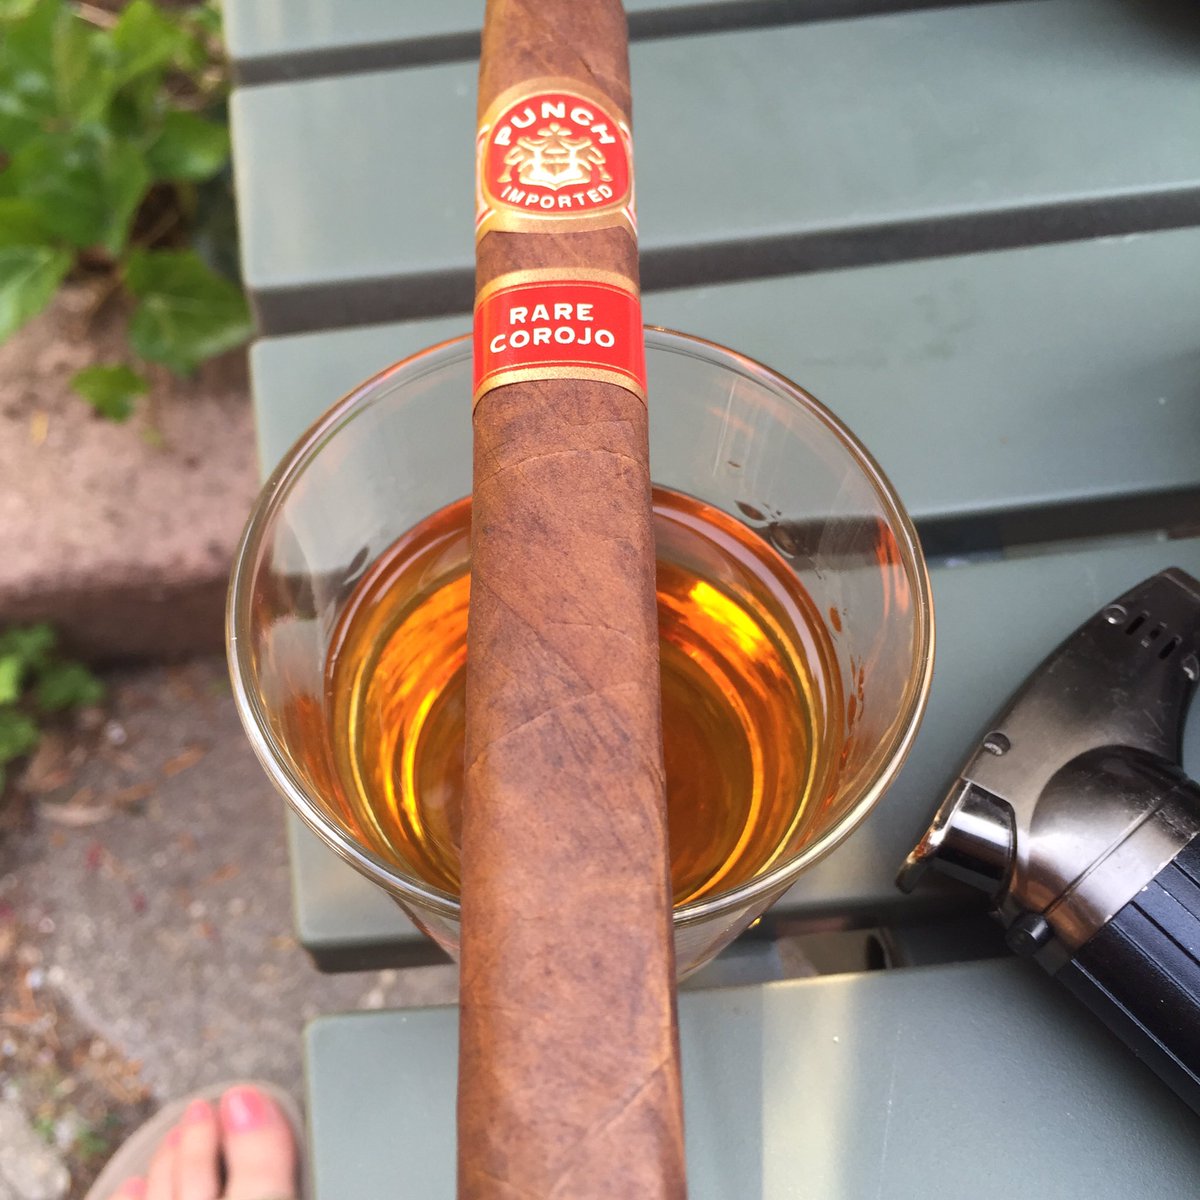 #smokin @punchcigars #rarecorojo with @flordecana & it's hot in #NYC 89 @HN_JAD @PistolCliff @CigarChairman